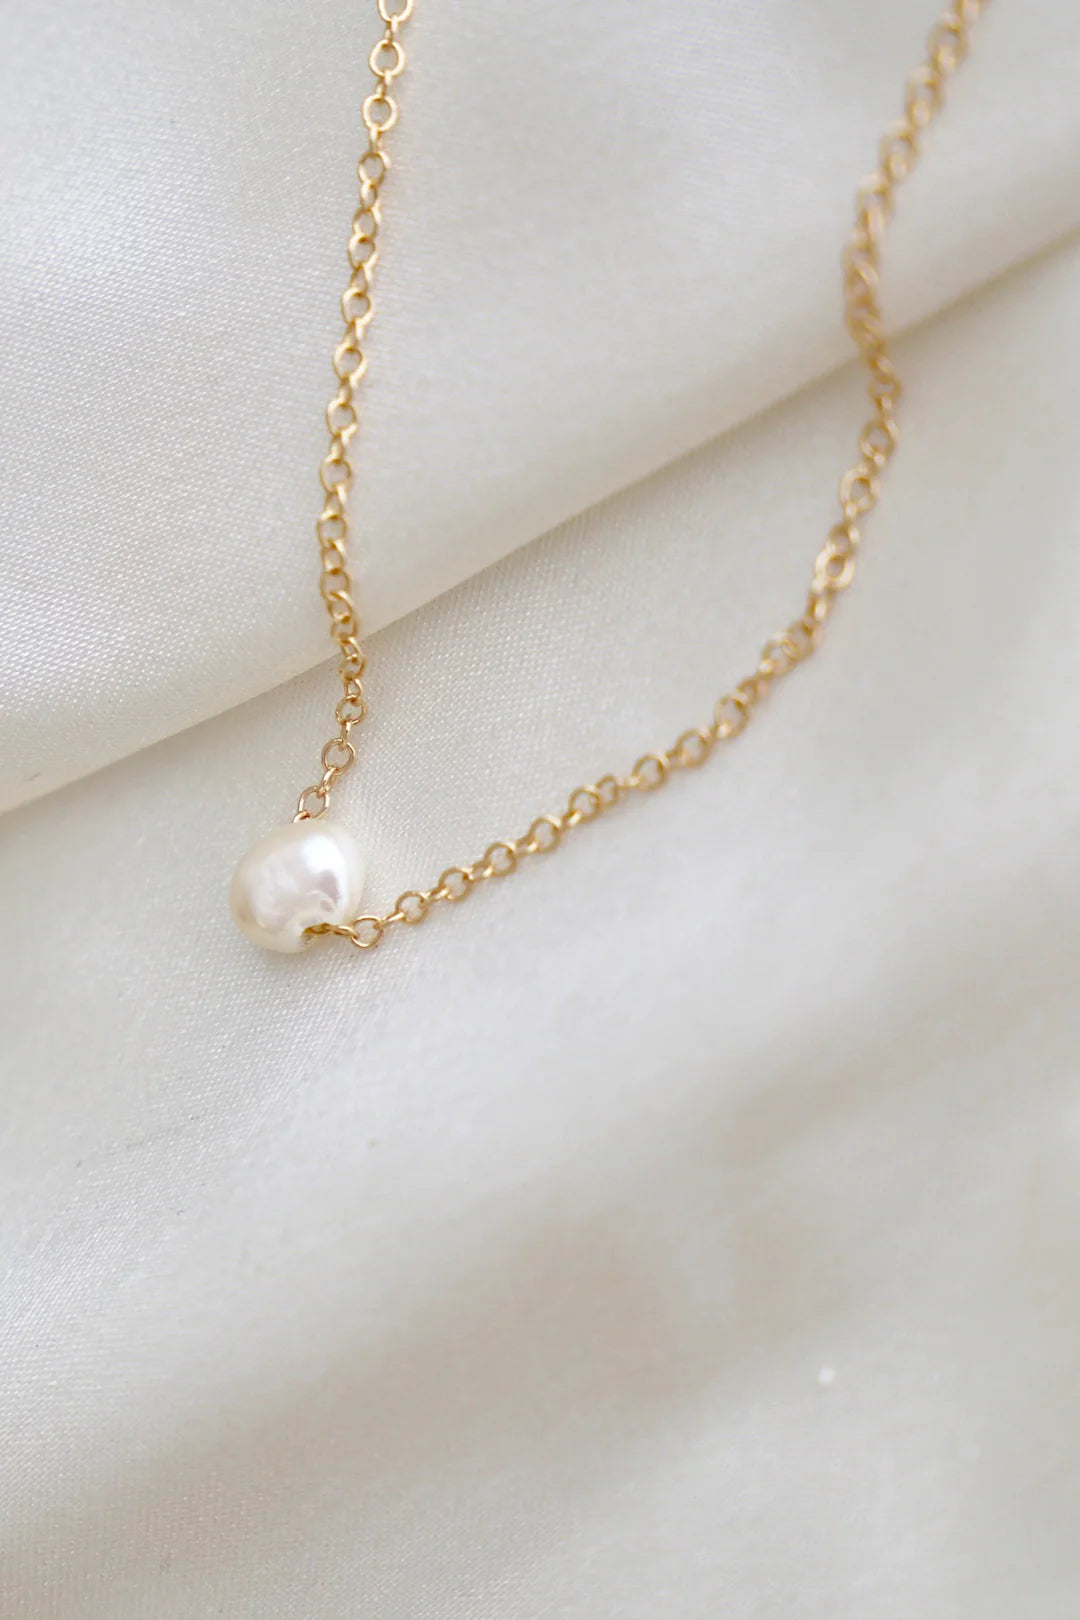 The Pearl Cove Necklace